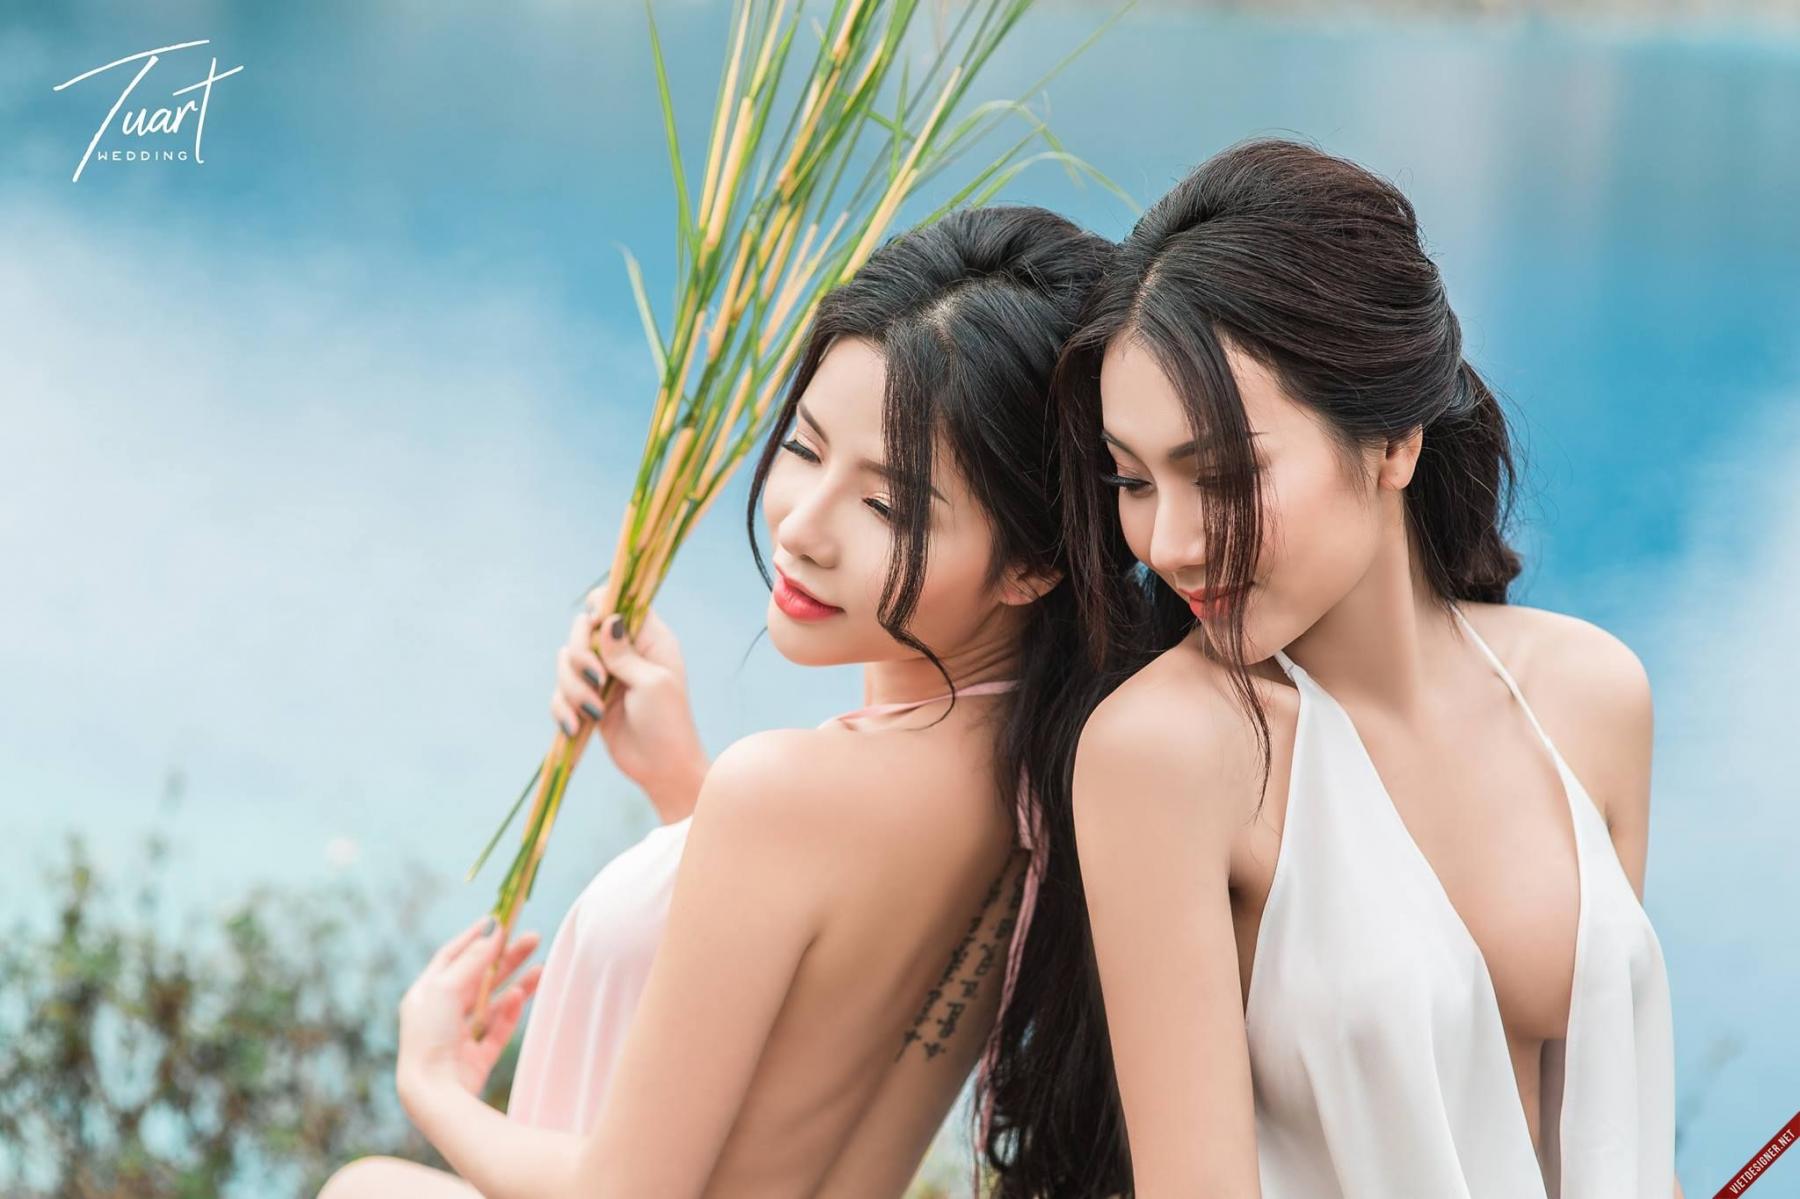 Vietnam Sexy Sisters Lakeside to Rescue Drowning Teenagers 1